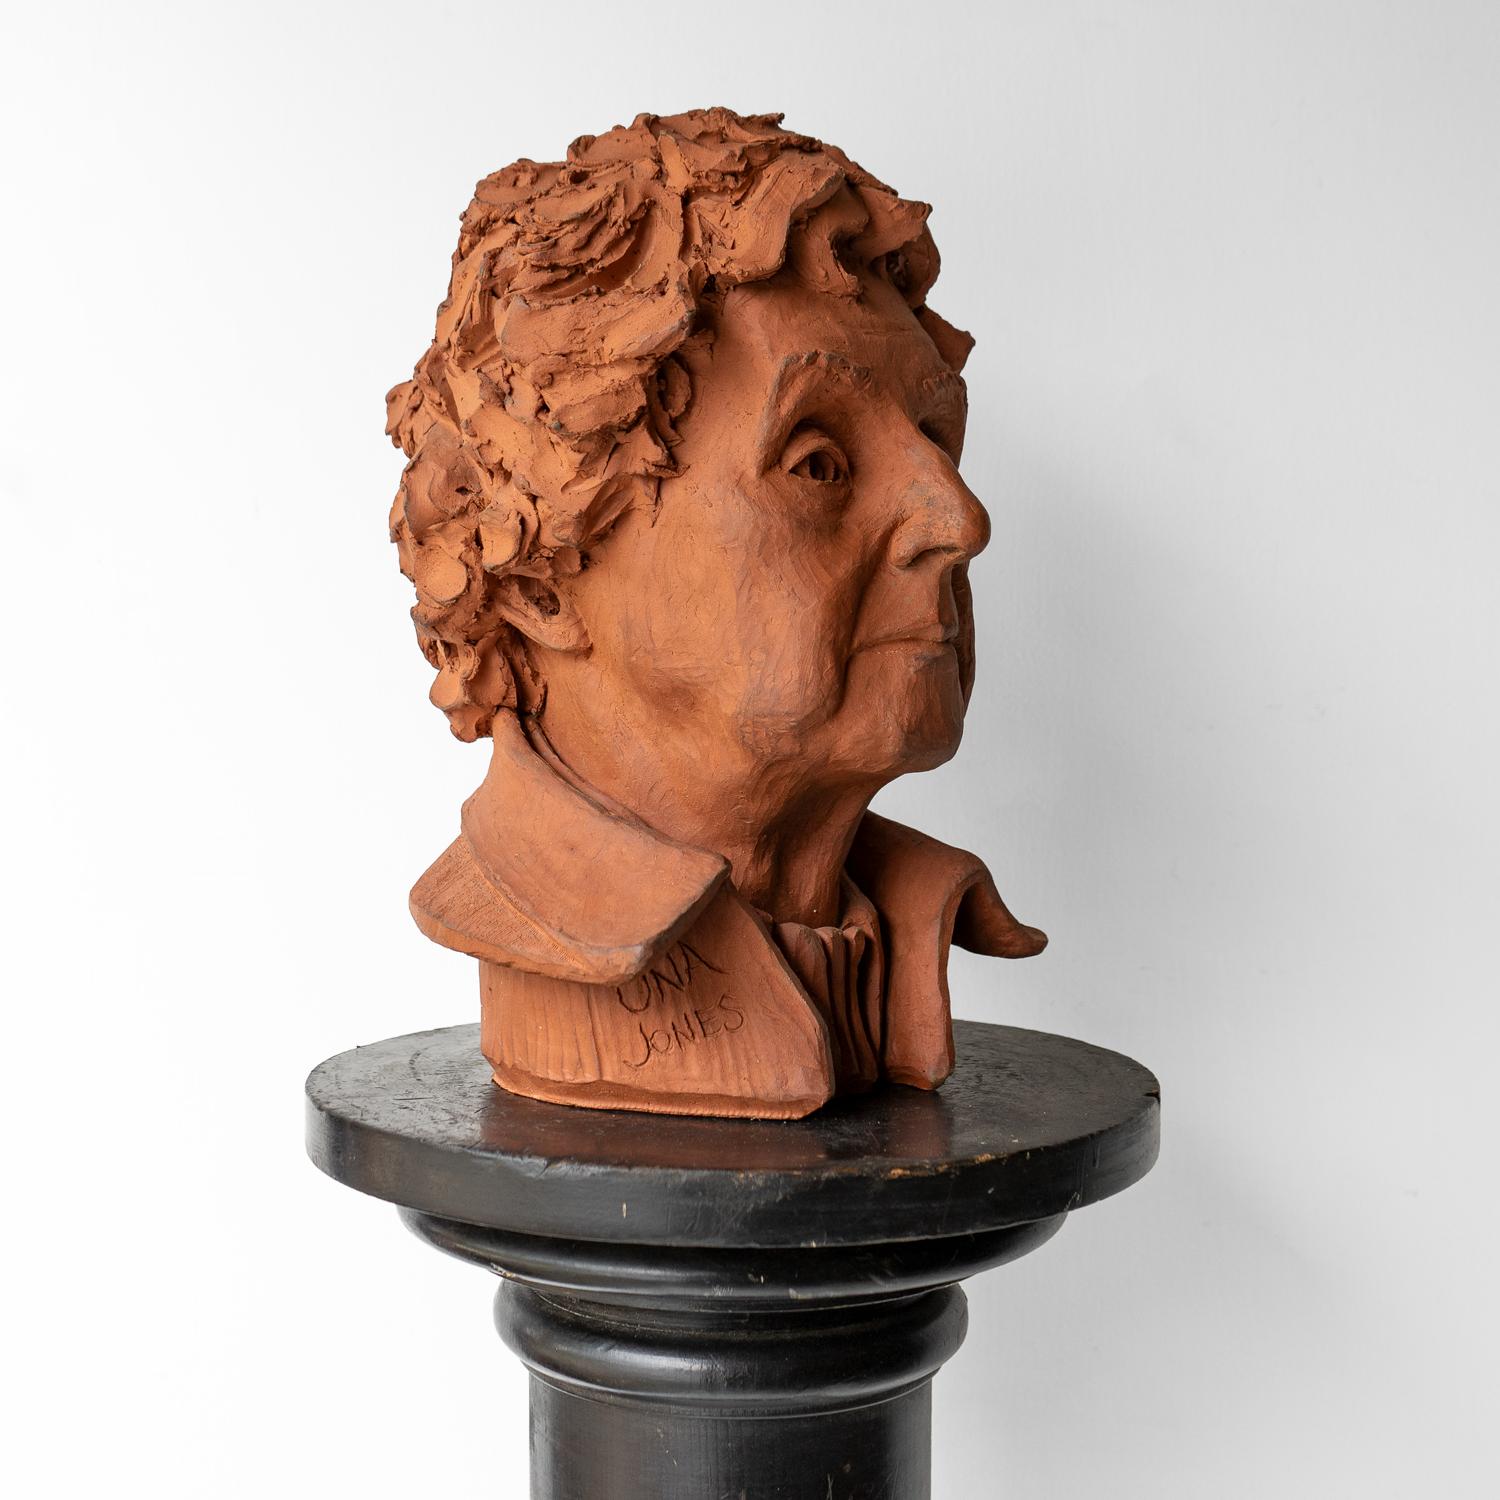 Vintage Ceramic Terracotta Portrait Bust Sculpture, Late 20th Century In Good Condition For Sale In Bristol, GB